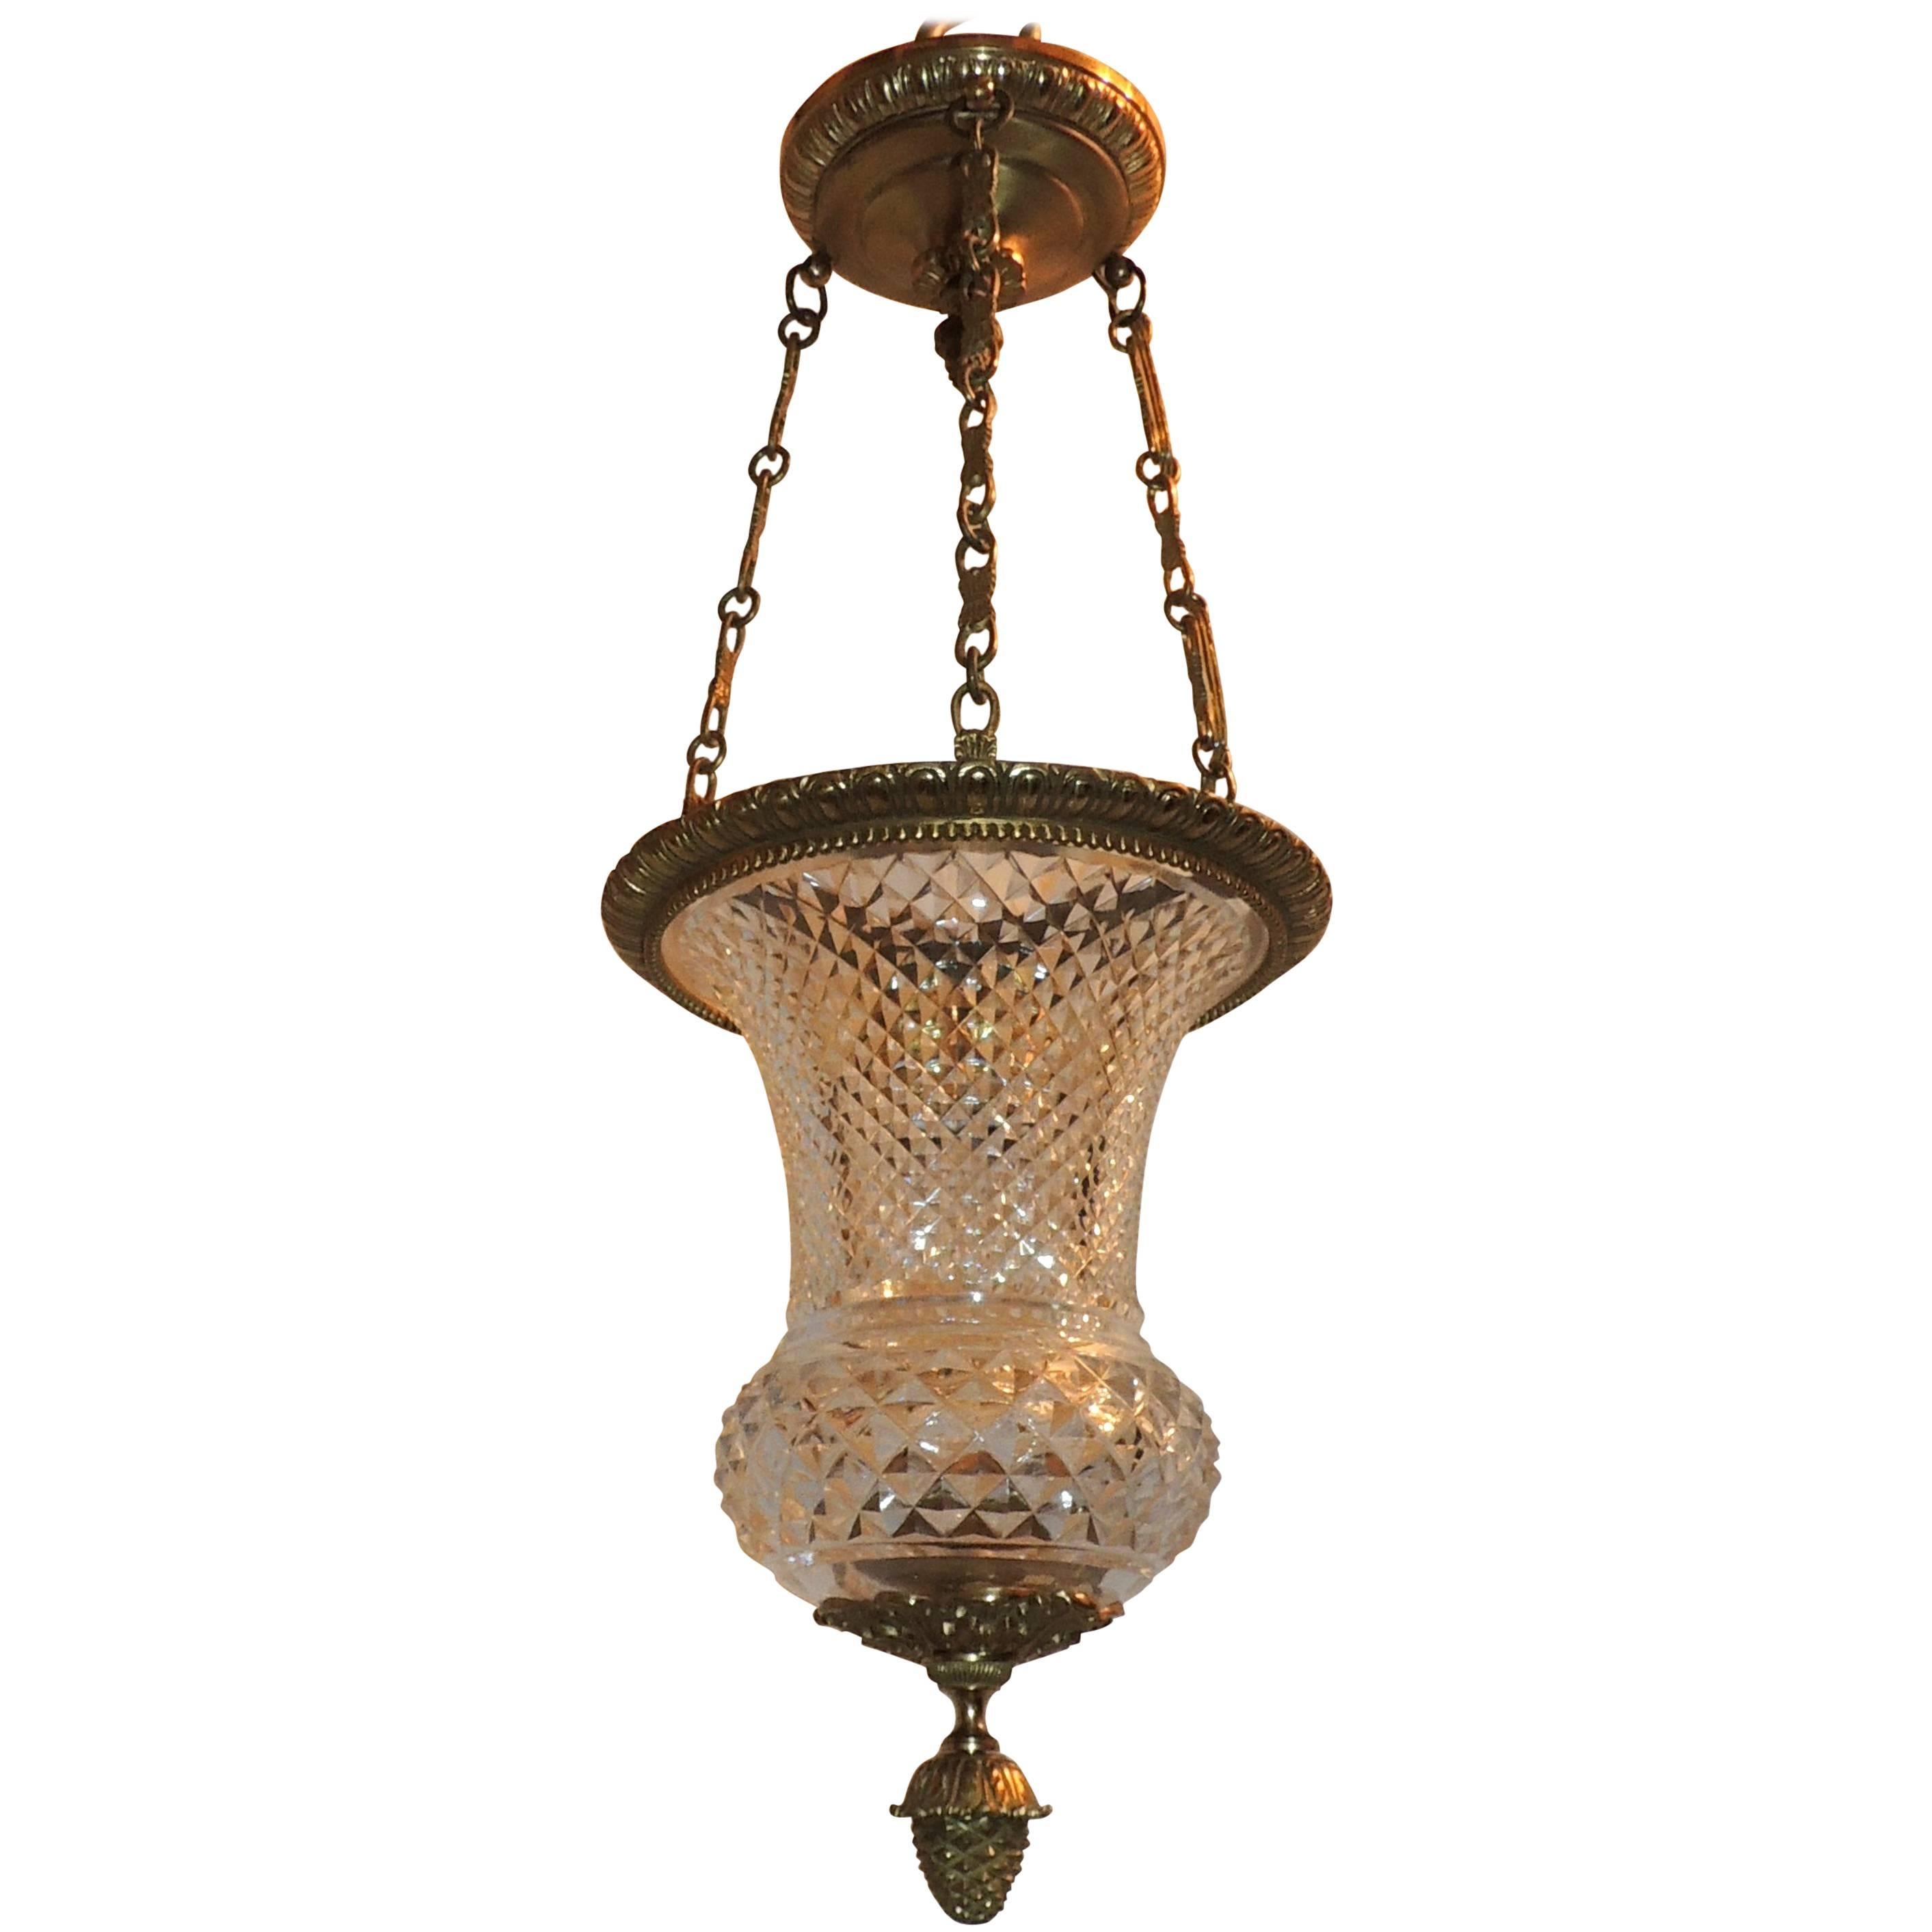 Wonderful French Neoclassical Dore Bronze Cut Crystal Lantern Fixture Pendent